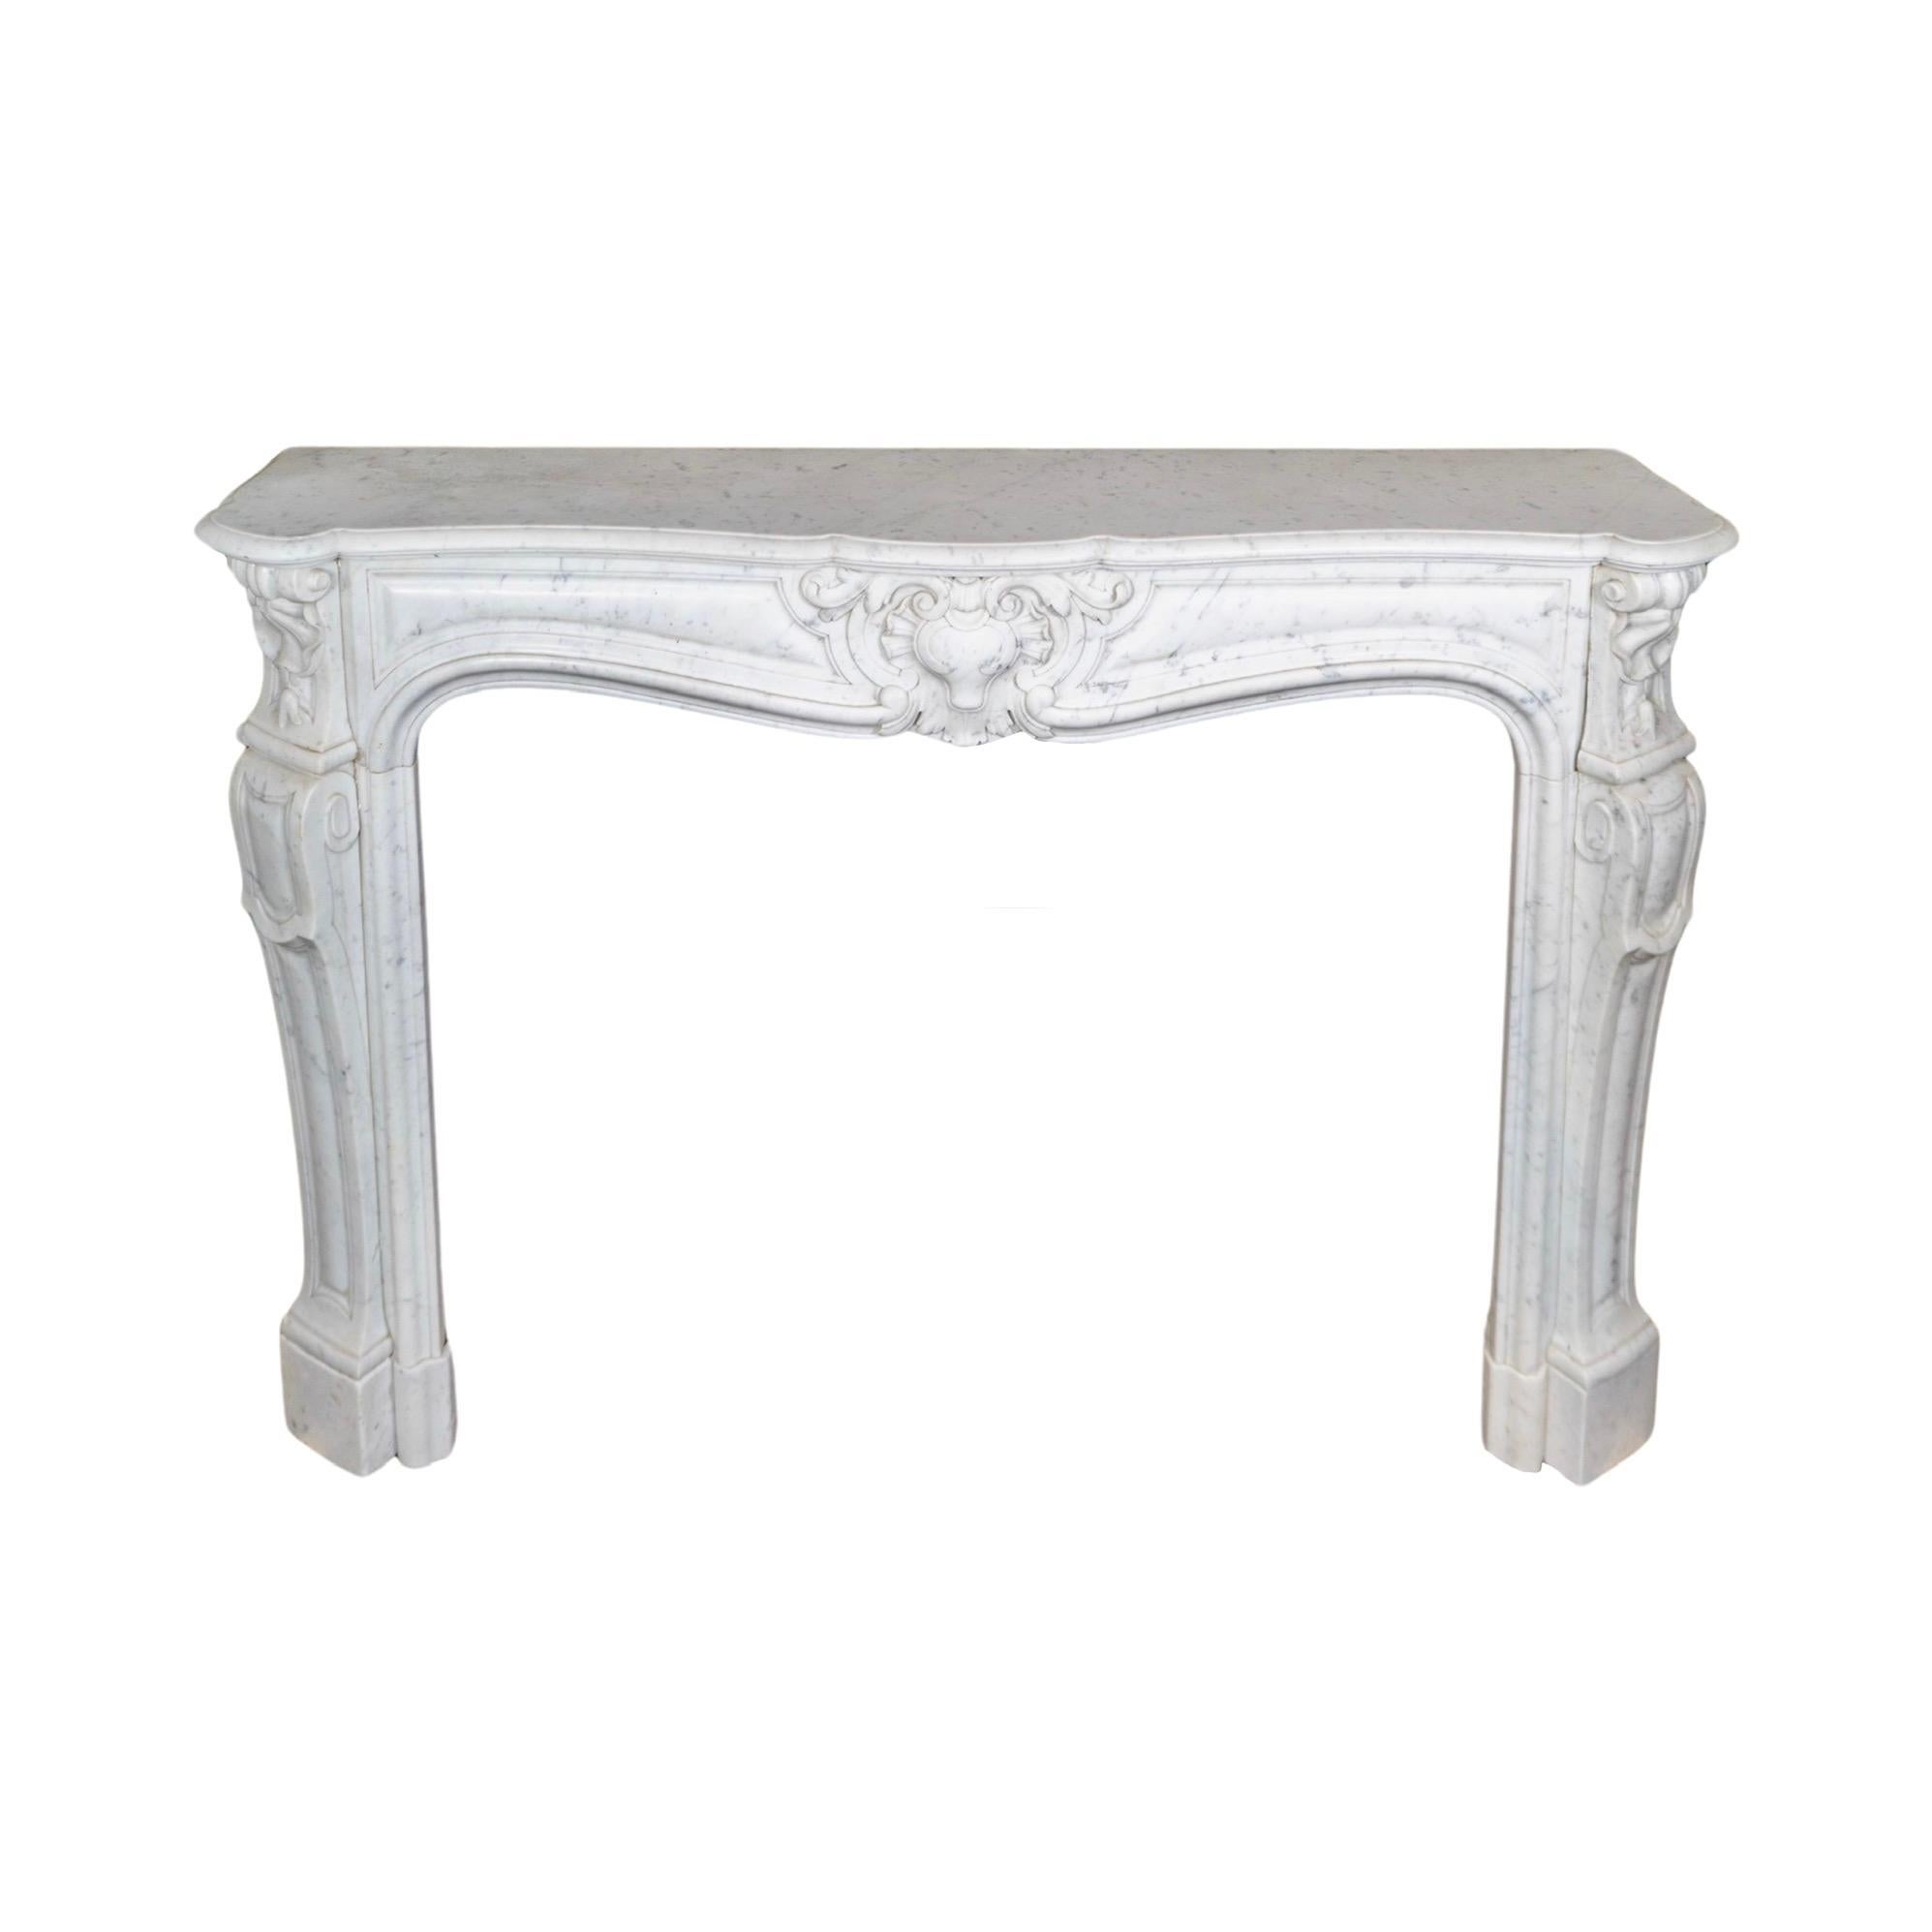 French White Carrara Marble Mantel In Good Condition For Sale In Dallas, TX